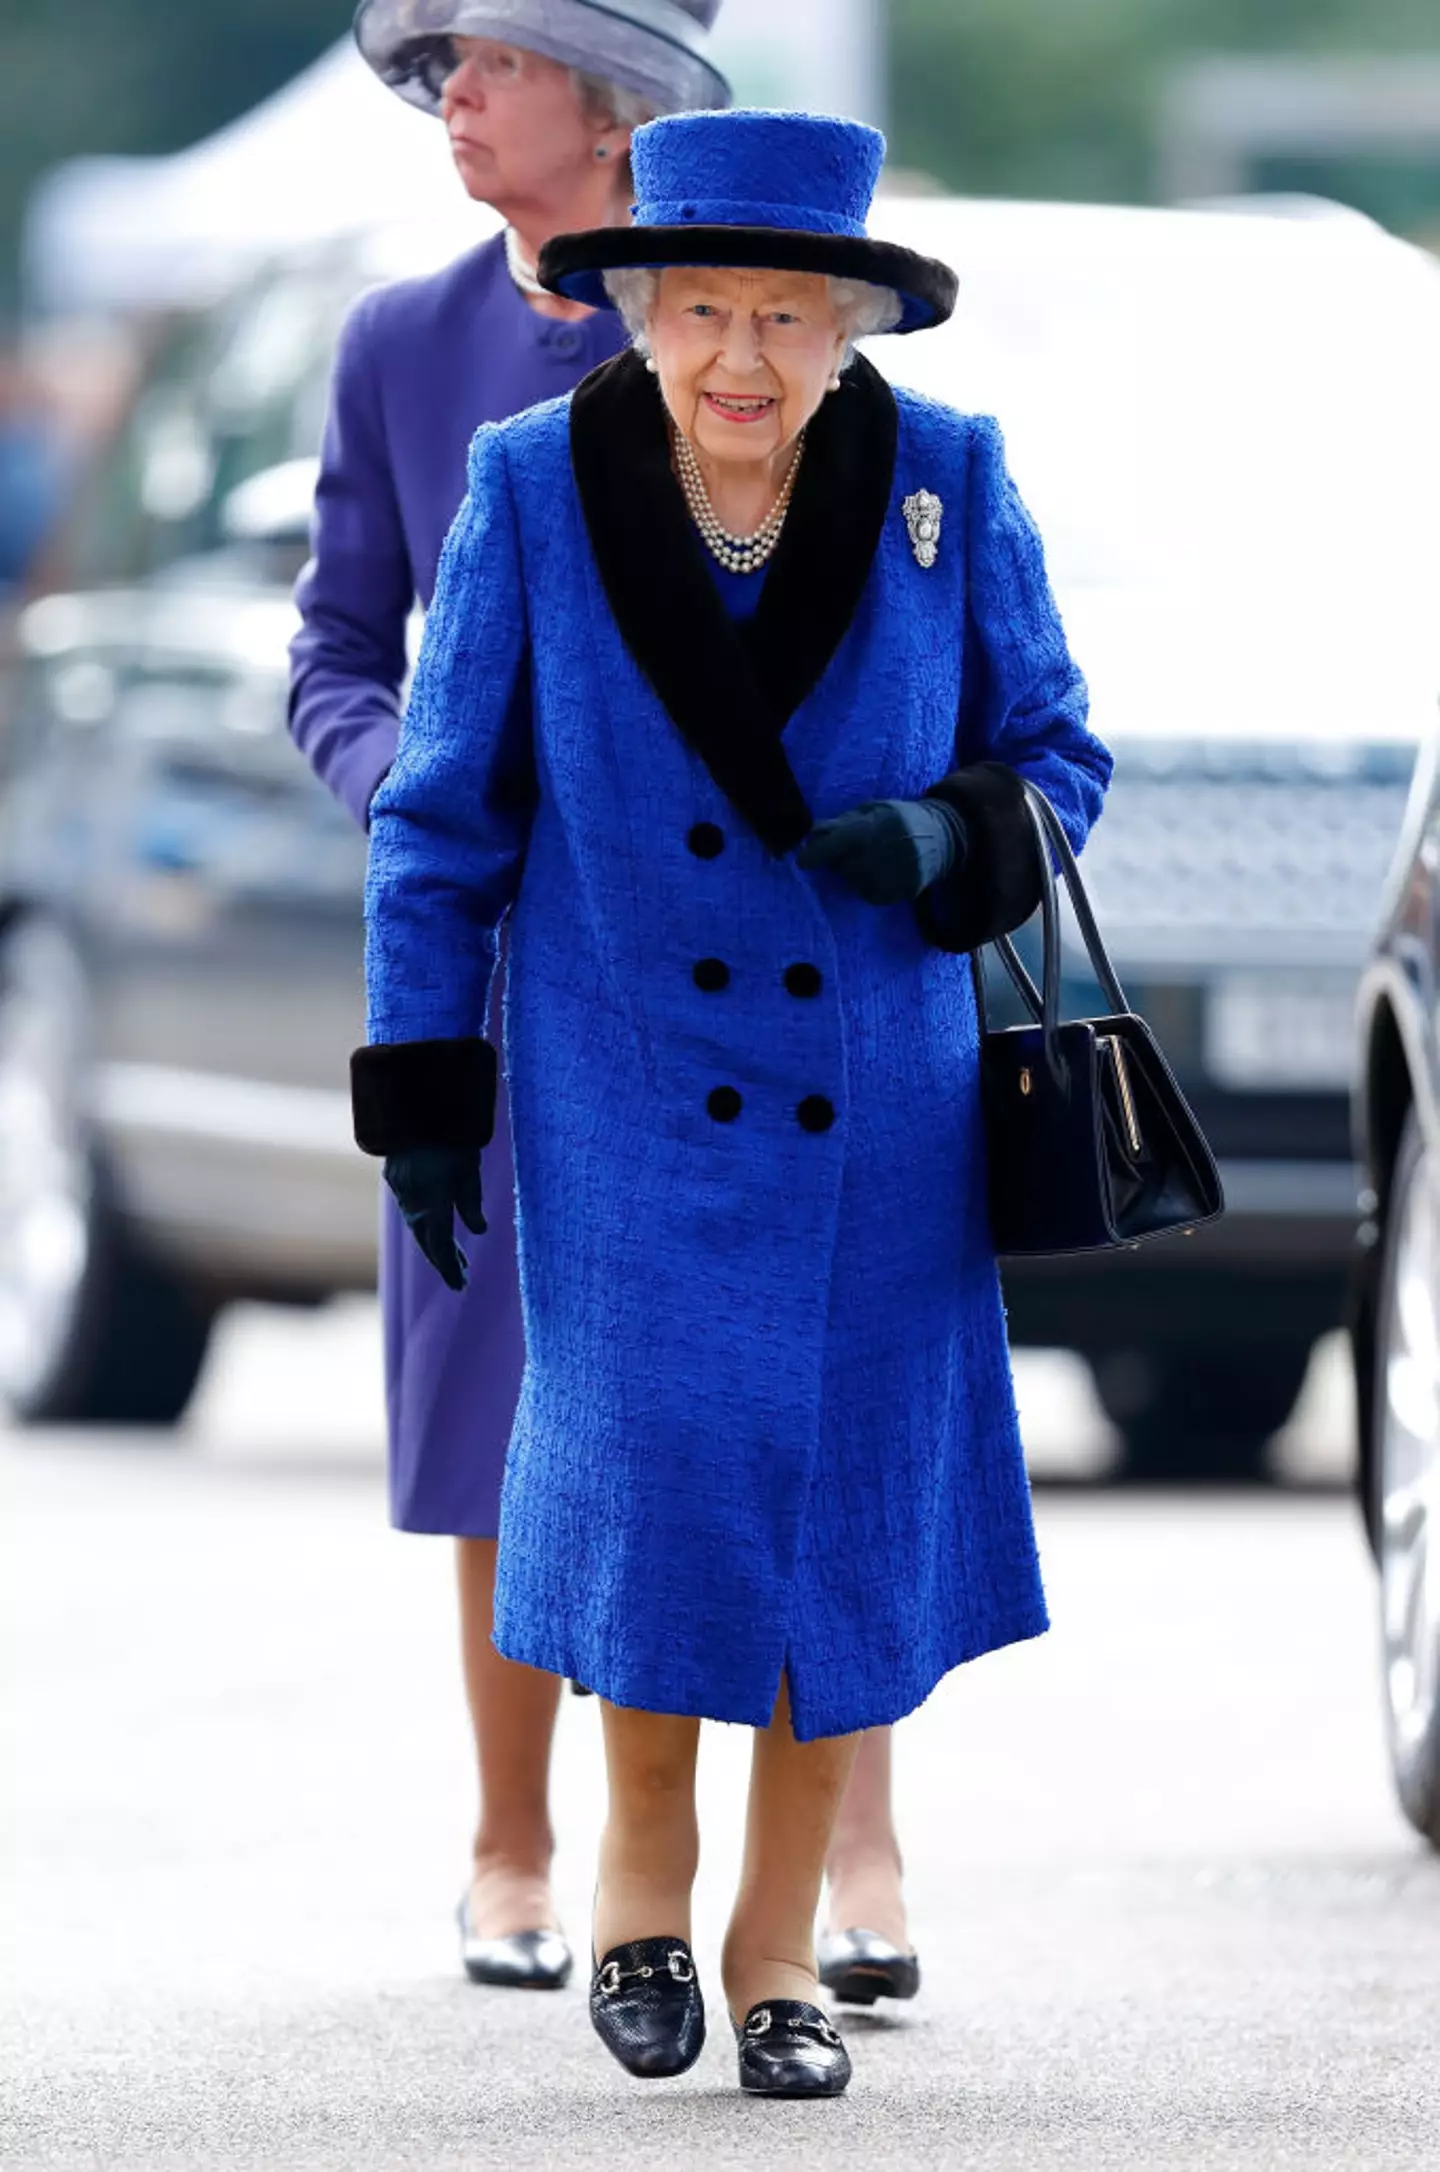 The Queen opted for nude tights on this occasion. (Max Mumby/Indigo/Getty Images)